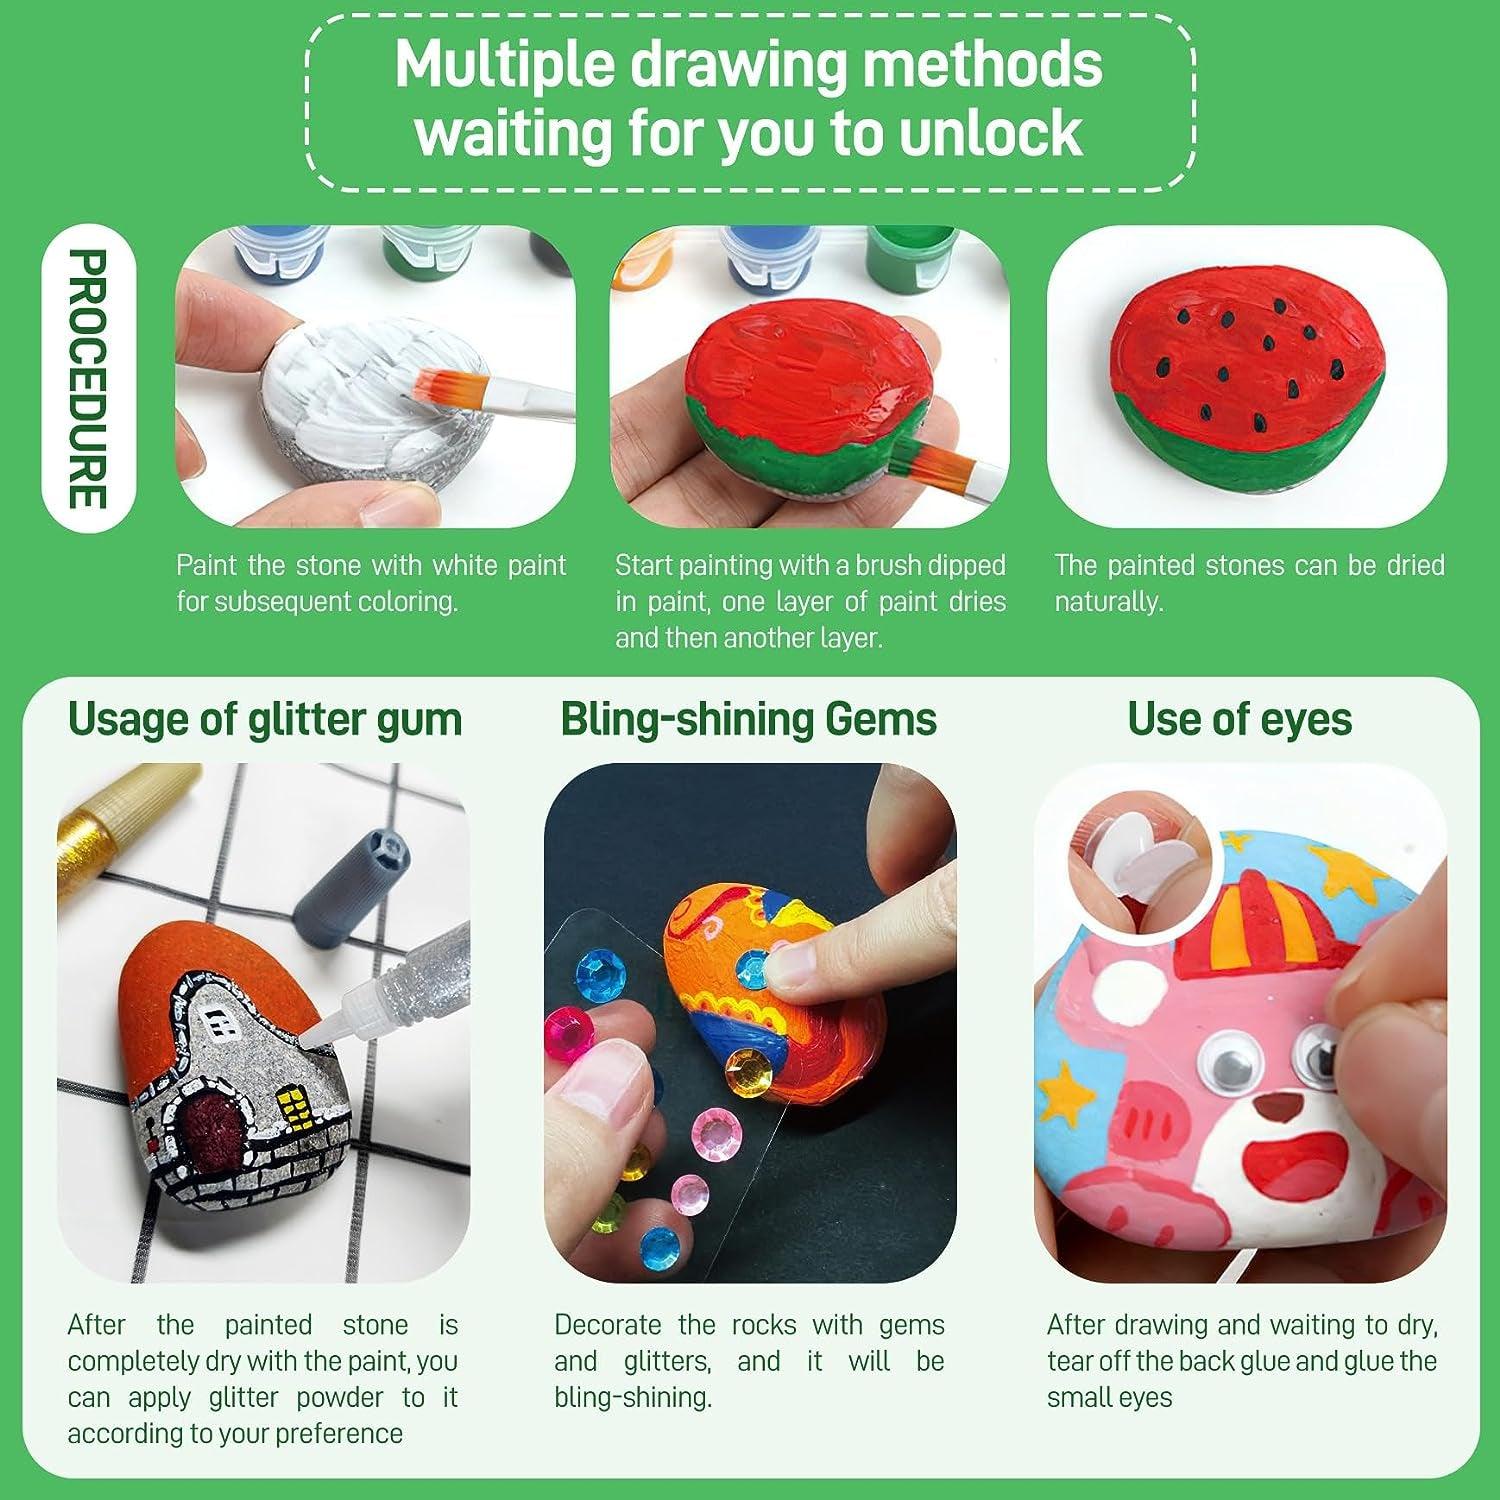 Rock Painting Kit for Kids 6-12, Glow in the Dark Paints, Creative Arts and Crafts Supplies Toys for Boys Girls Birthday Gift Ideas - WoodArtSupply